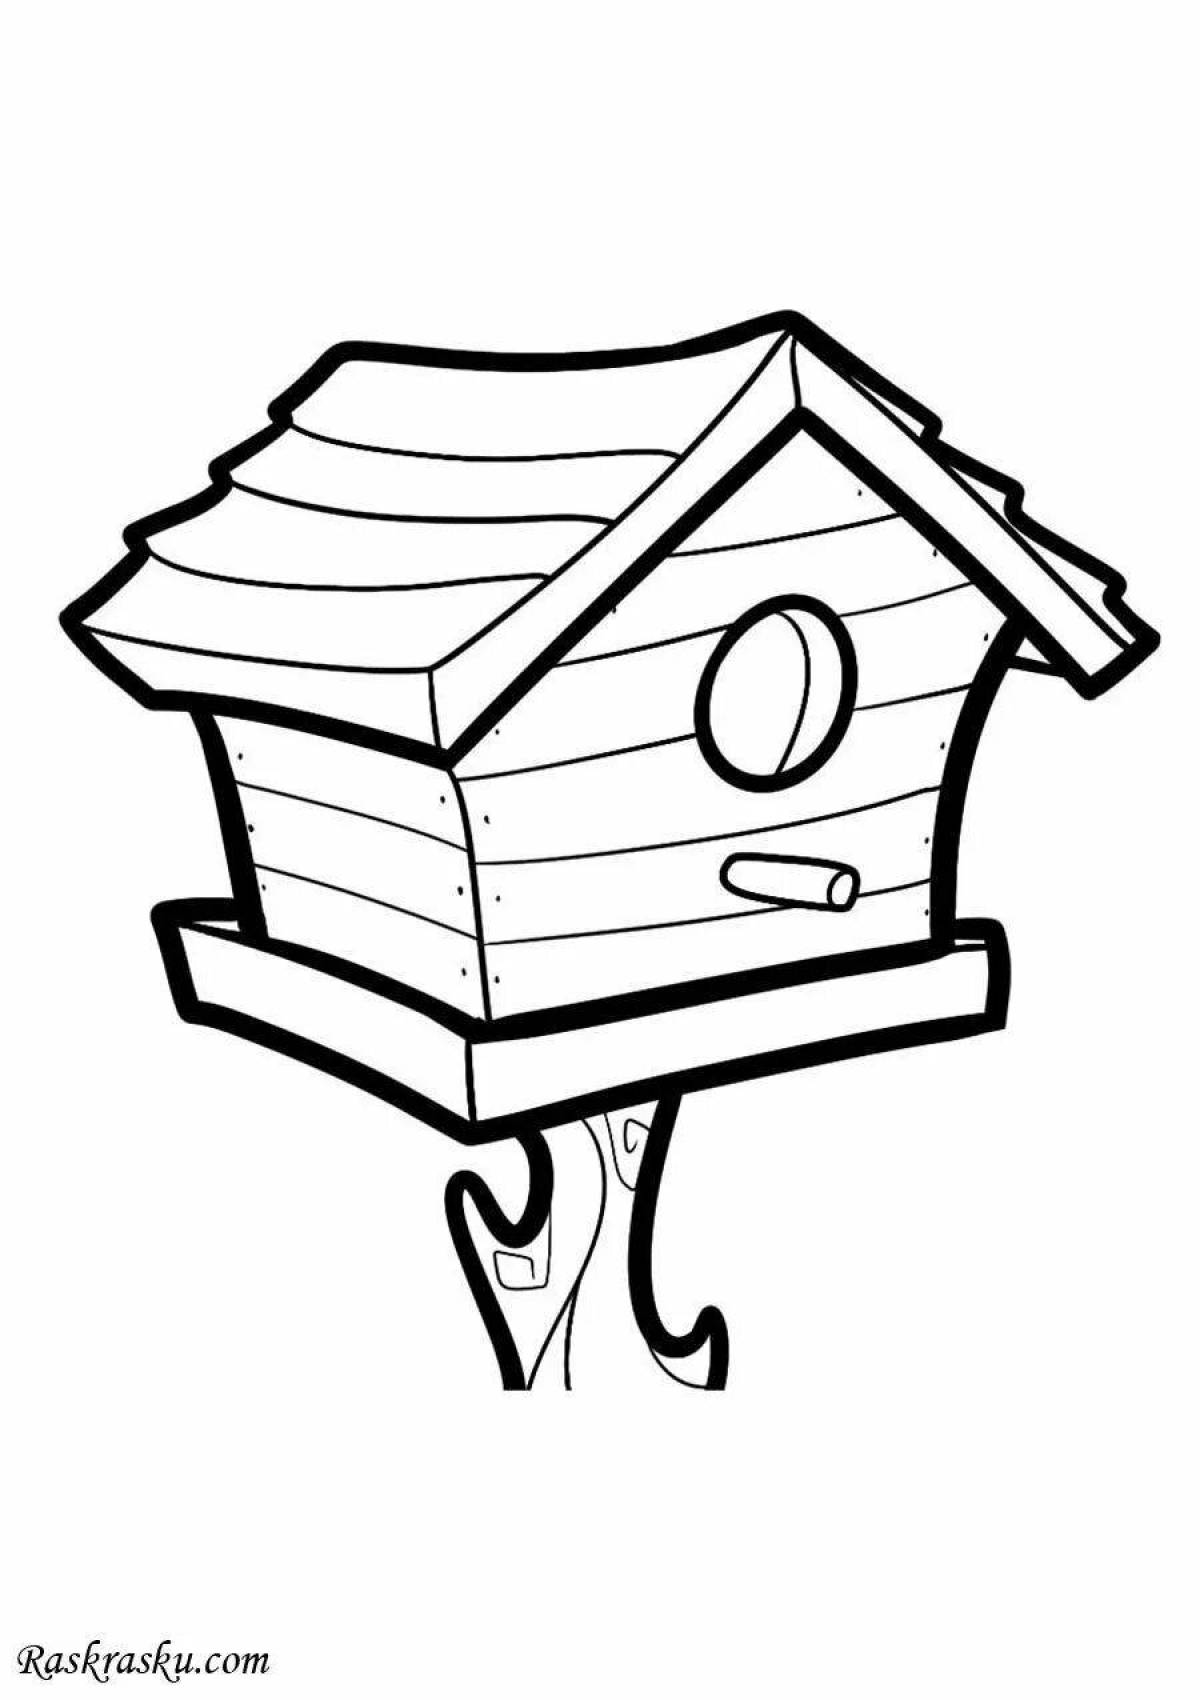 Awesome birdhouse coloring page for 3-4 year olds